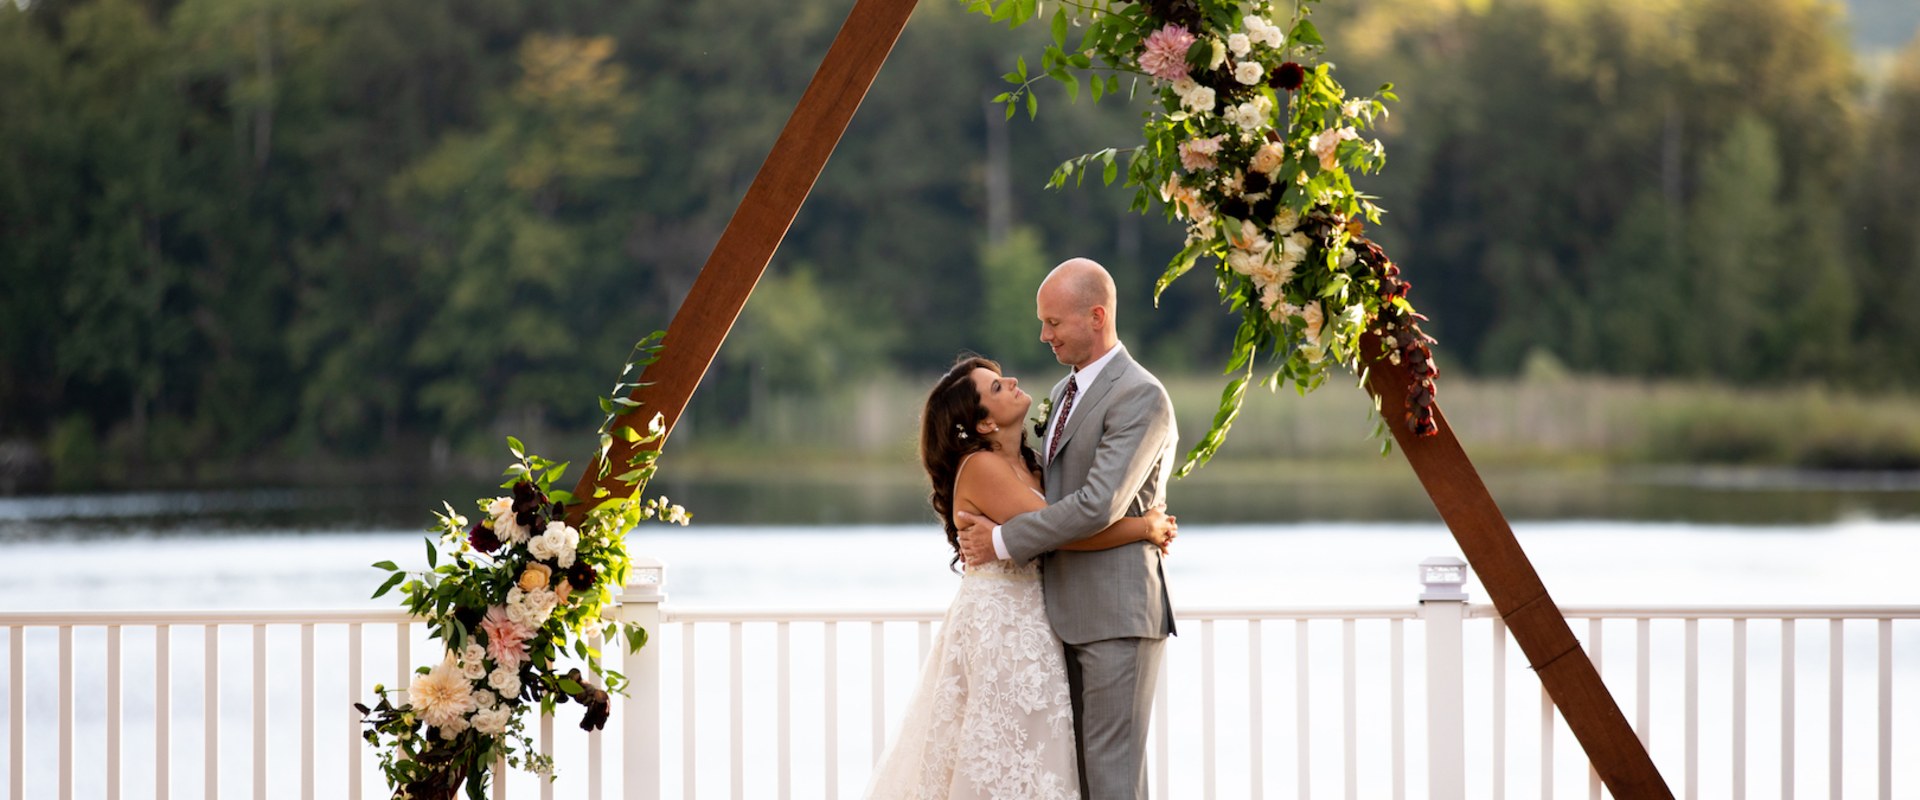 Reading Wedding Venue Reviews Online: A Comprehensive Guide for Choosing the Perfect Supplier